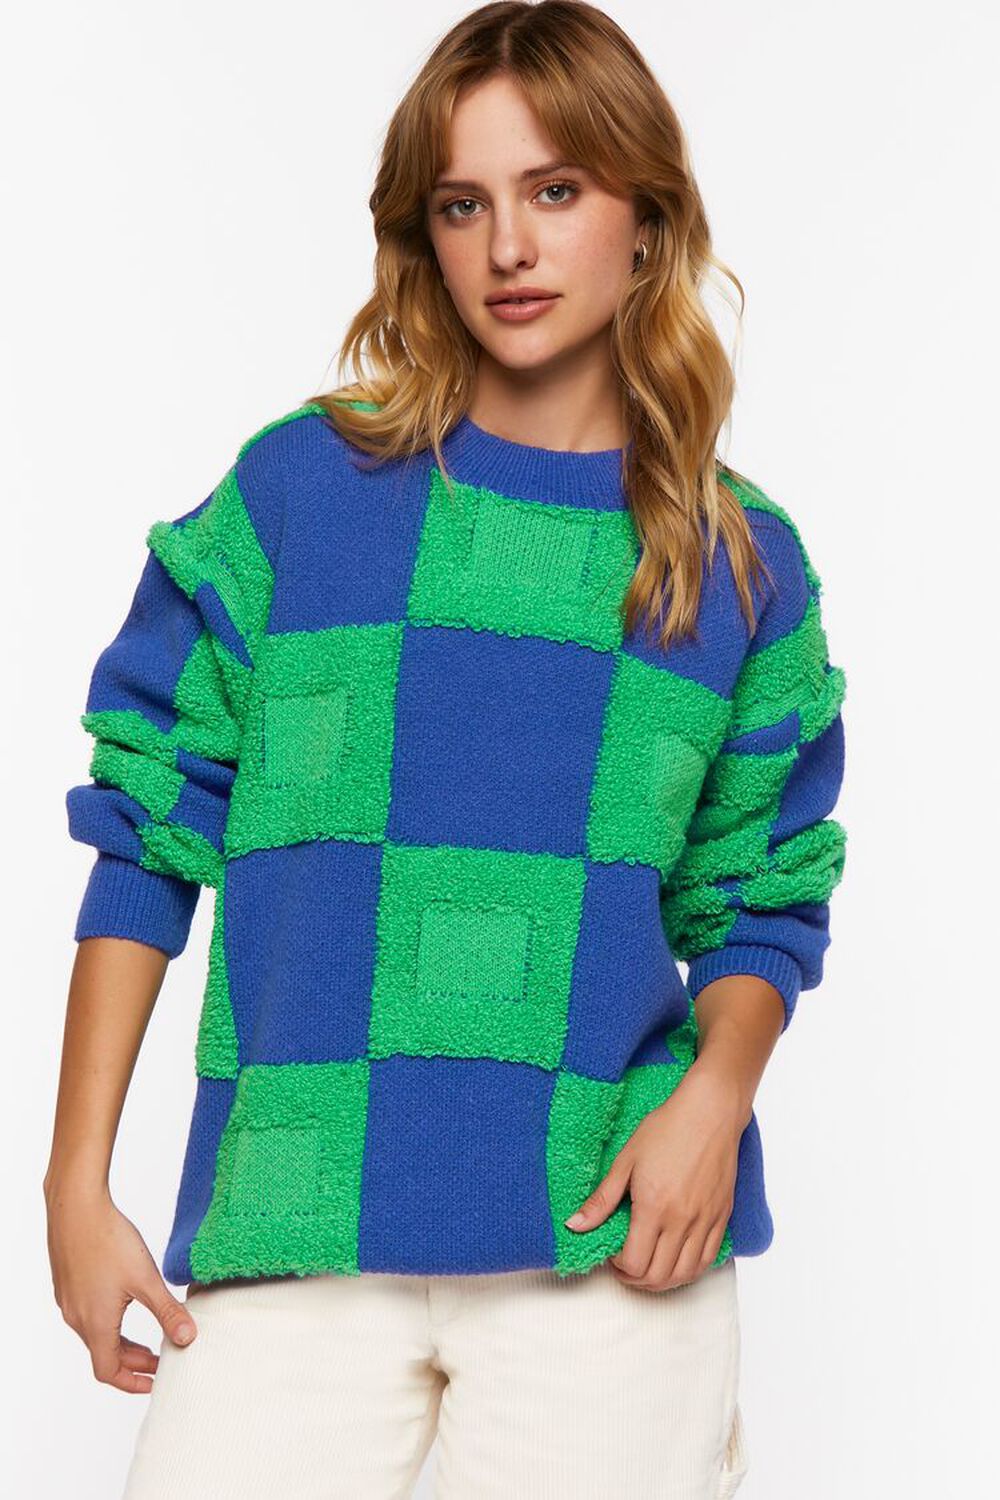 BLUE/GREEN Fuzzy Checkered Sweater, image 1